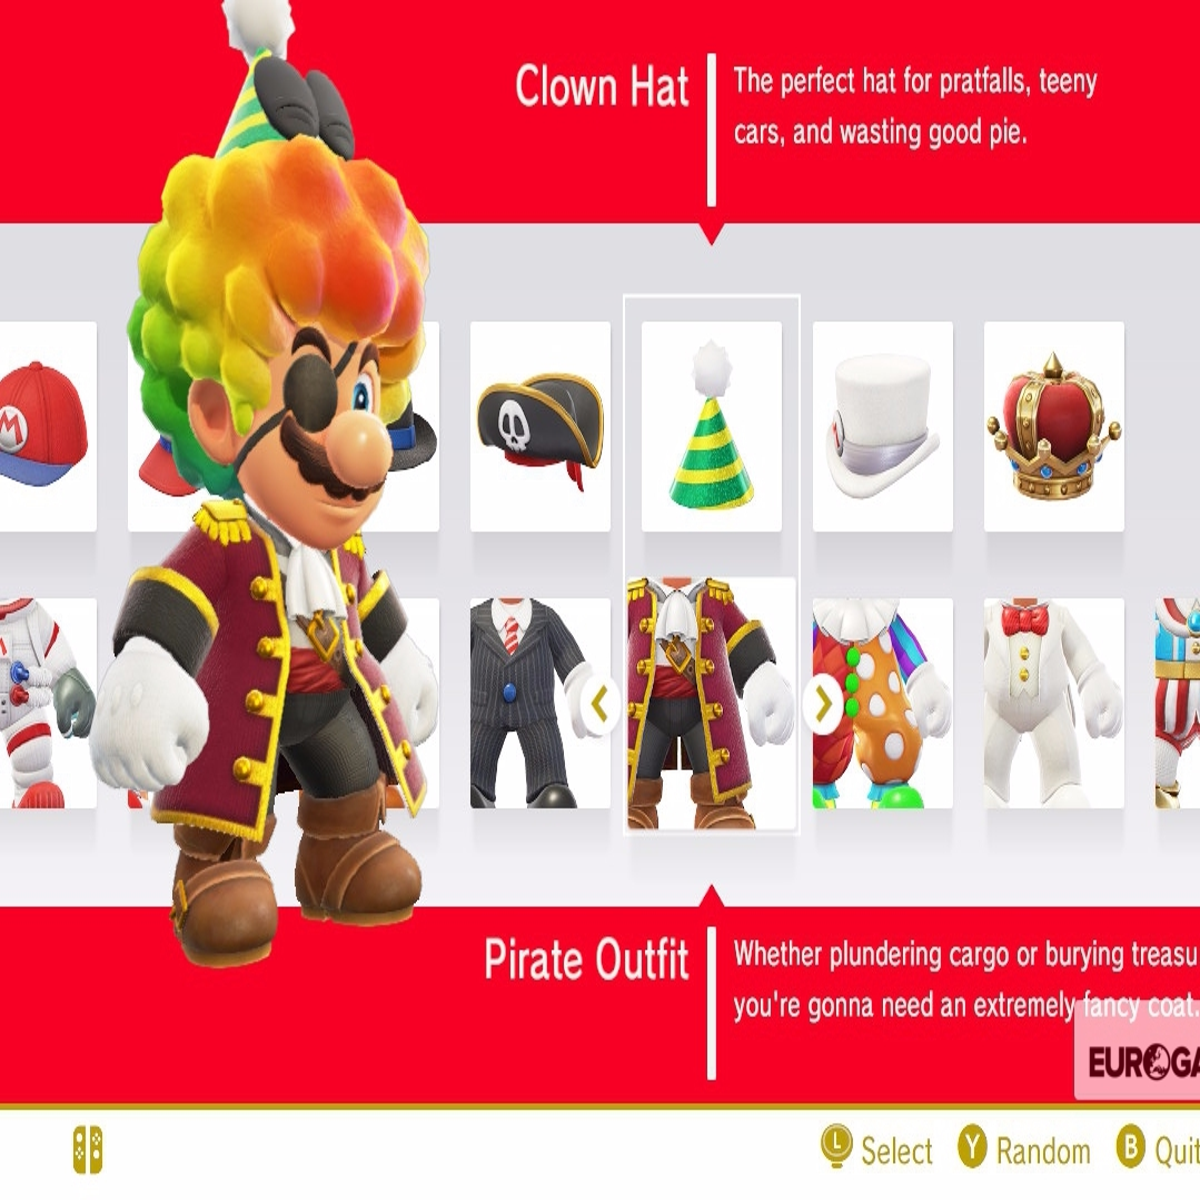 Super Mario Odyssey guide, walkthrough and tips: A complete guide